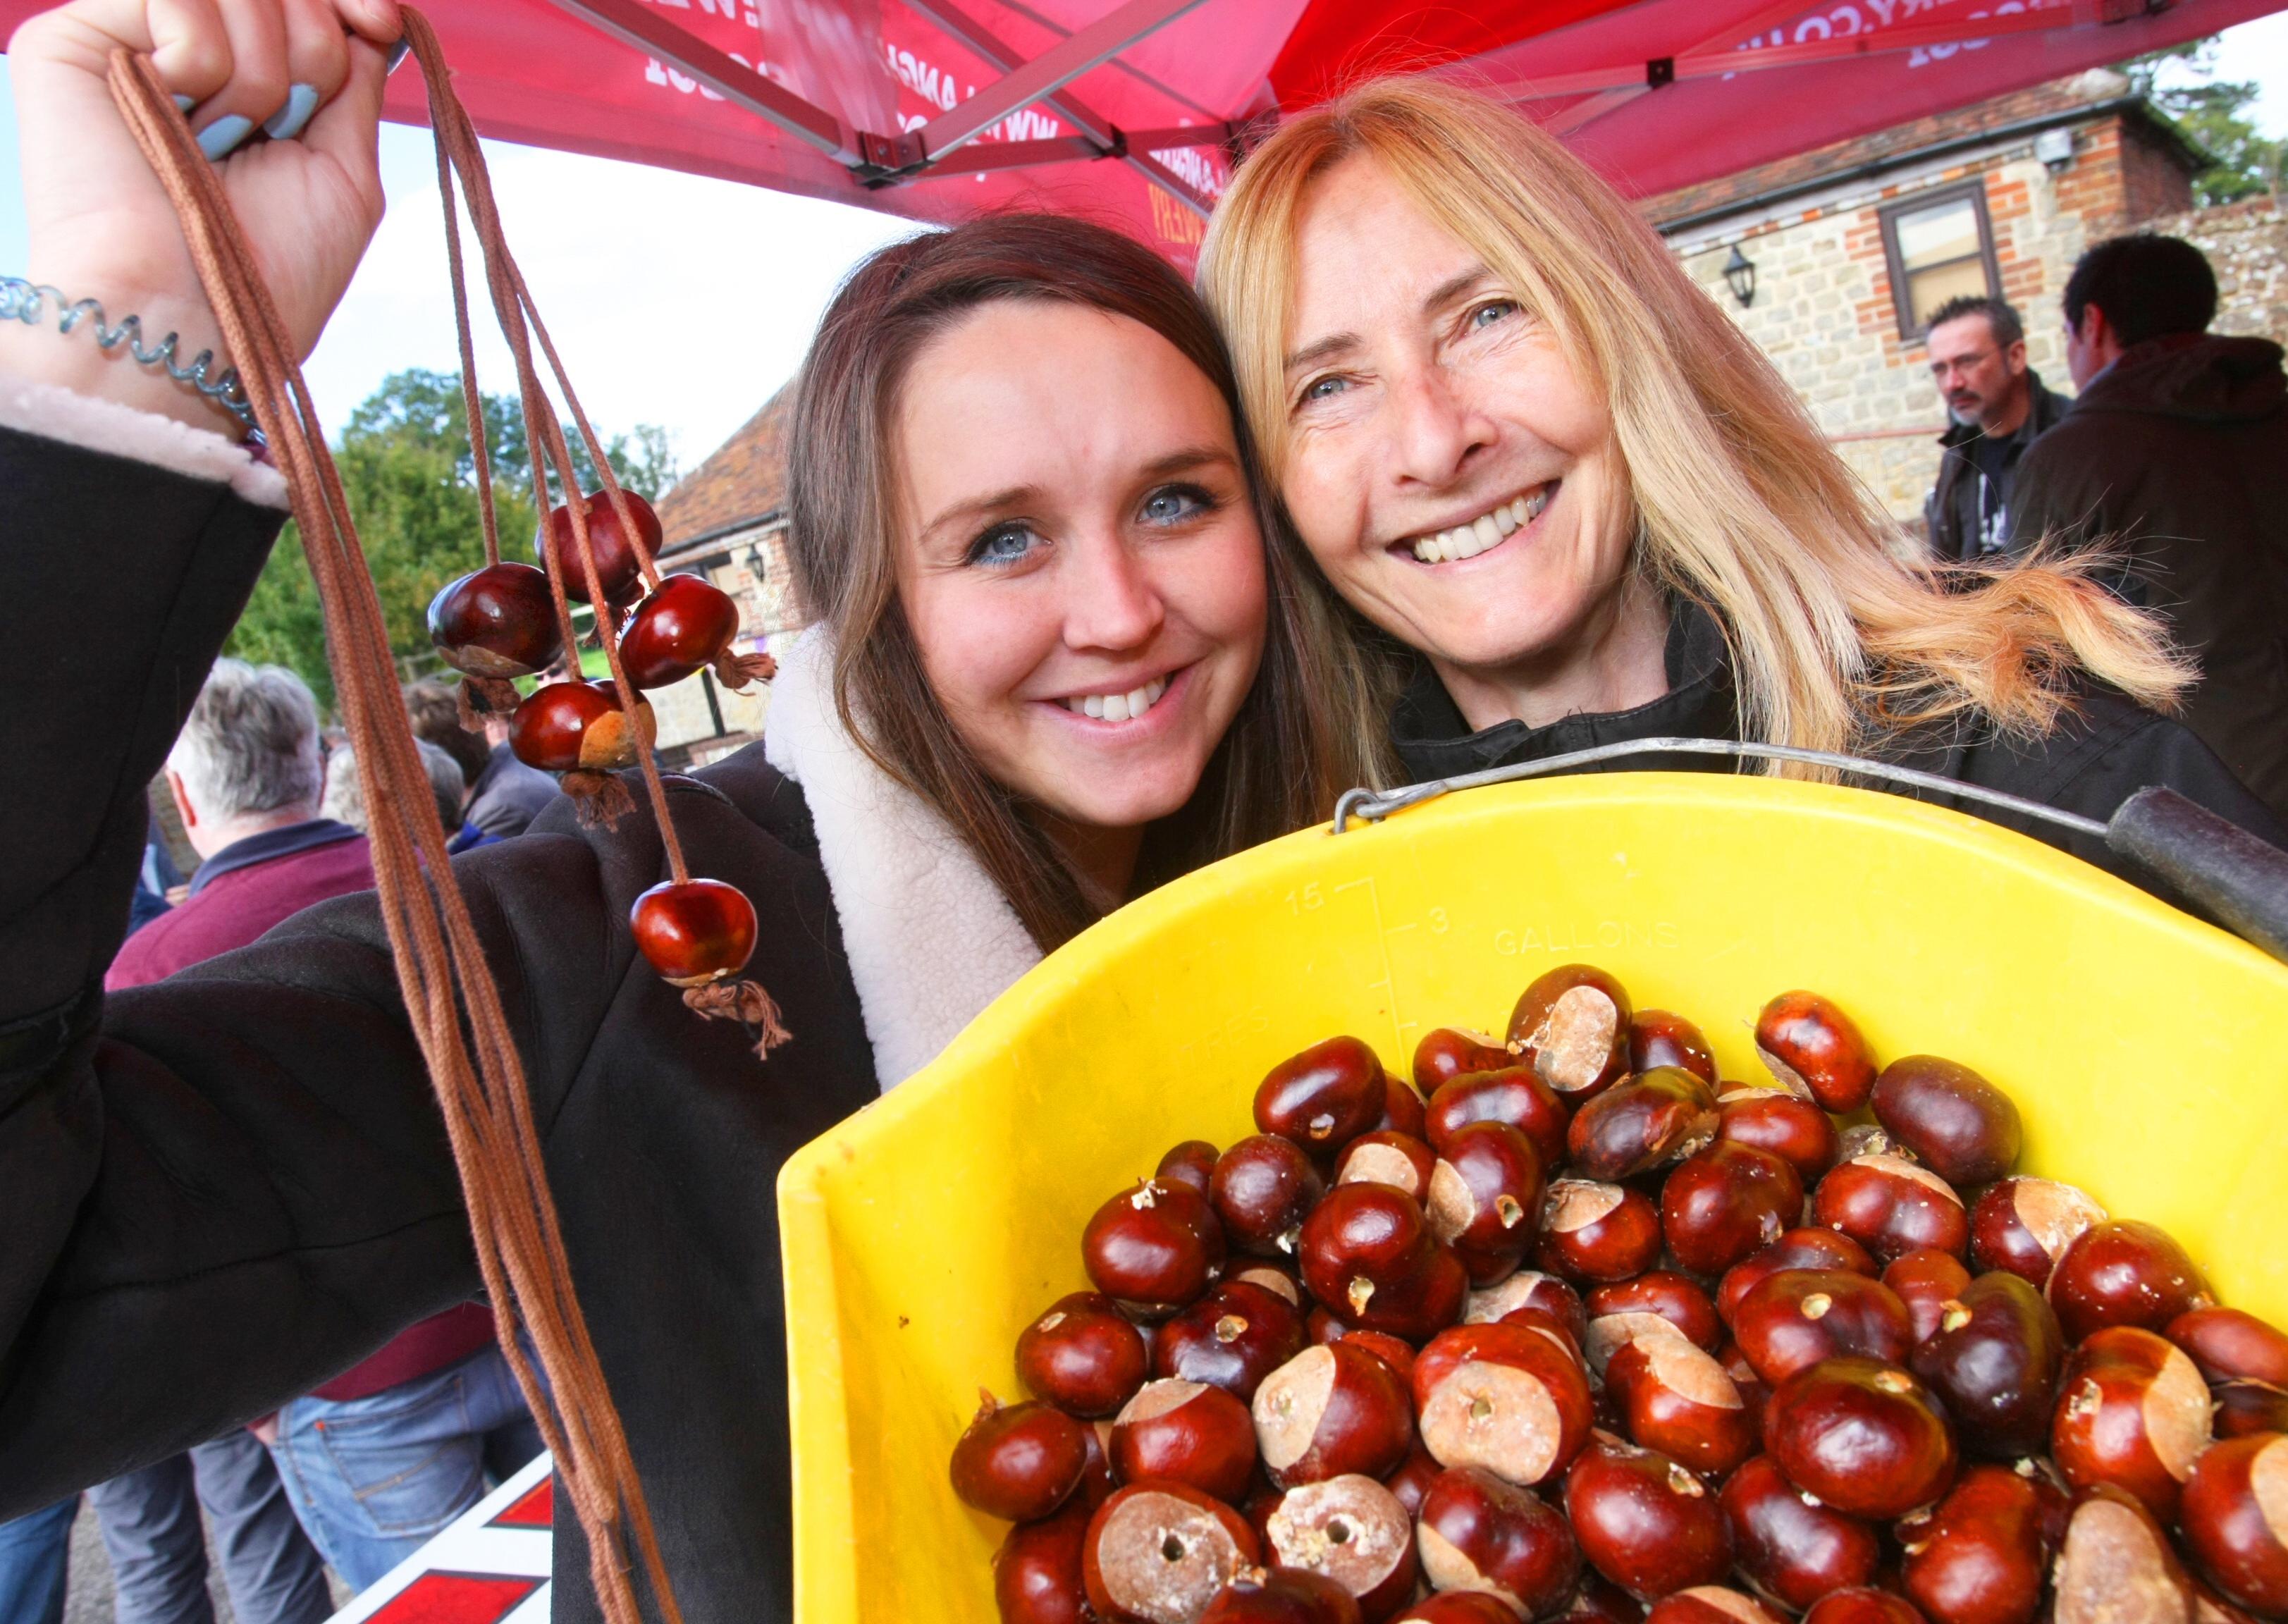 Bonkers for Conkers returns to Langham Brewery in Lodsworth on October 11